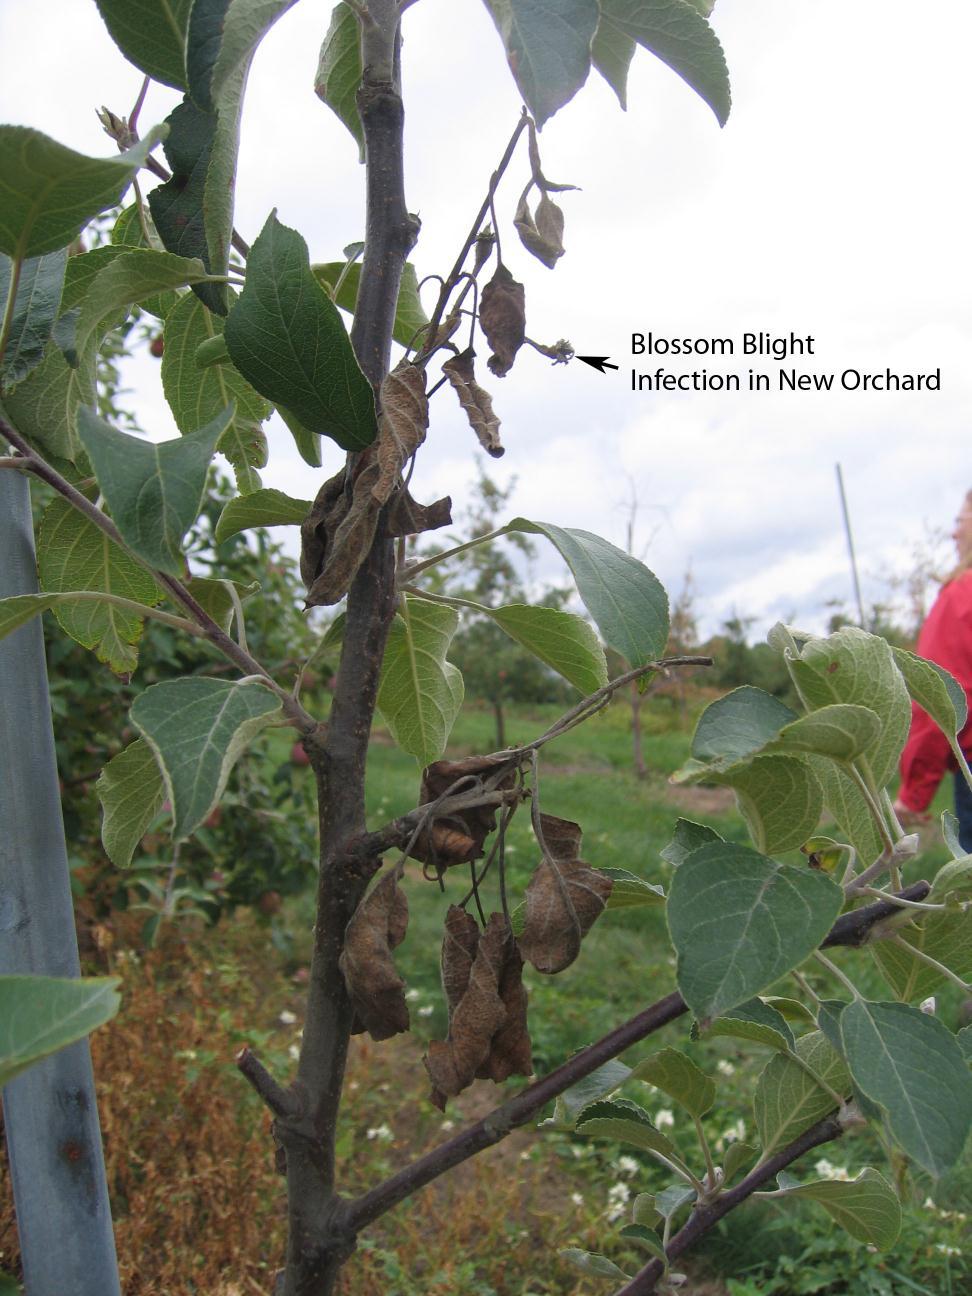 Fire Blight Limits Planting of New Varieties The high susceptibility of new varieties such as Pink Lady and Jazz make it difficult to plant new orchards